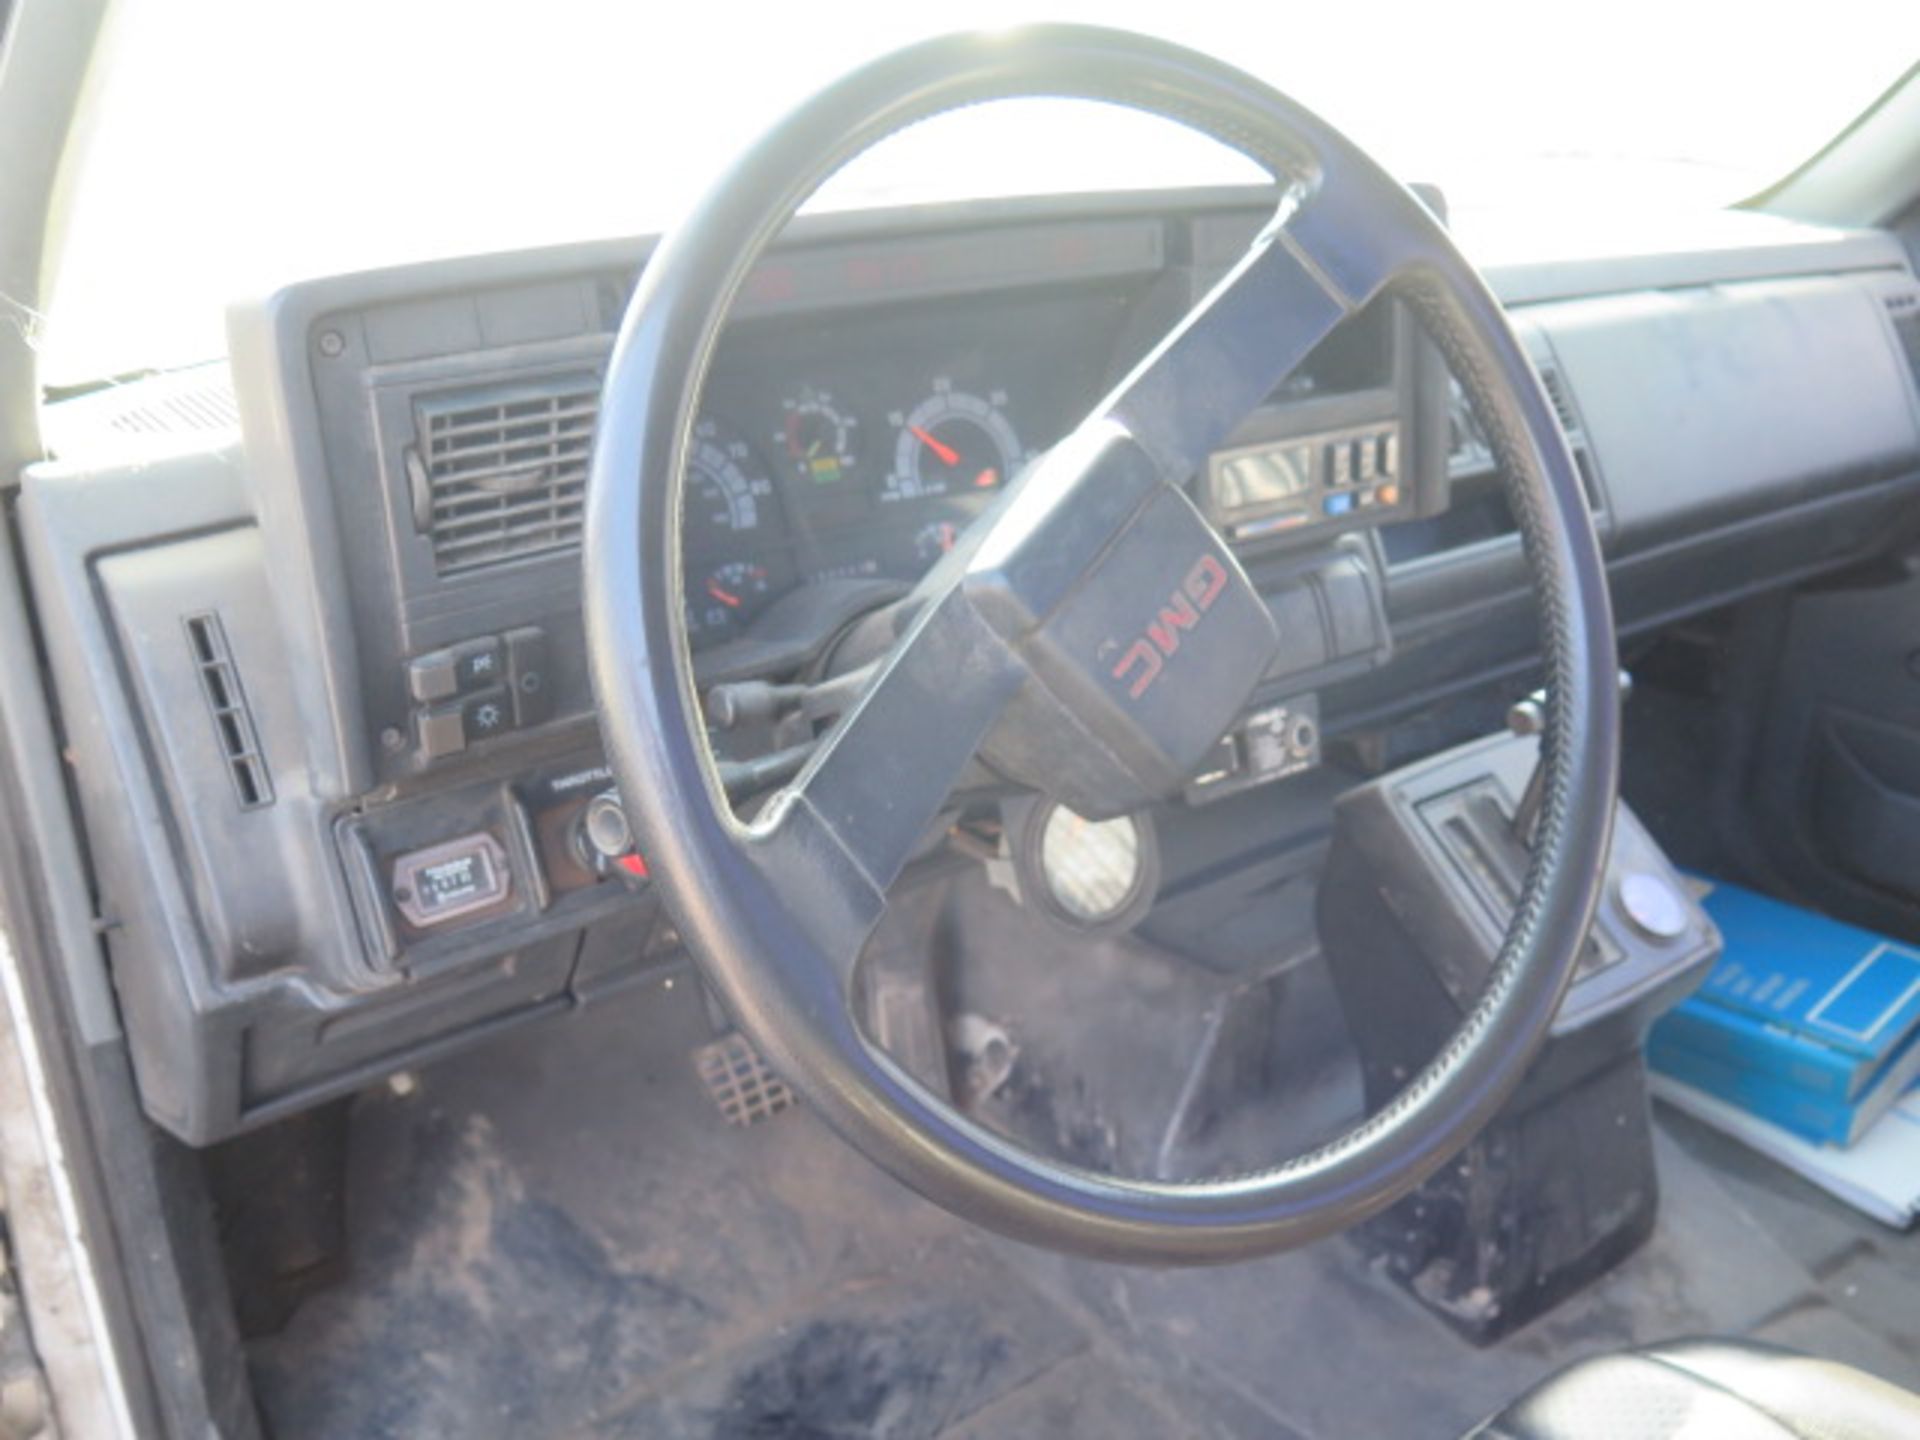 1992 GMC Top Kick Service Truck Lisc# 4J61885 w/ Caterpillar Diesel Engine, Automatic, SOLD AS IS - Image 18 of 24